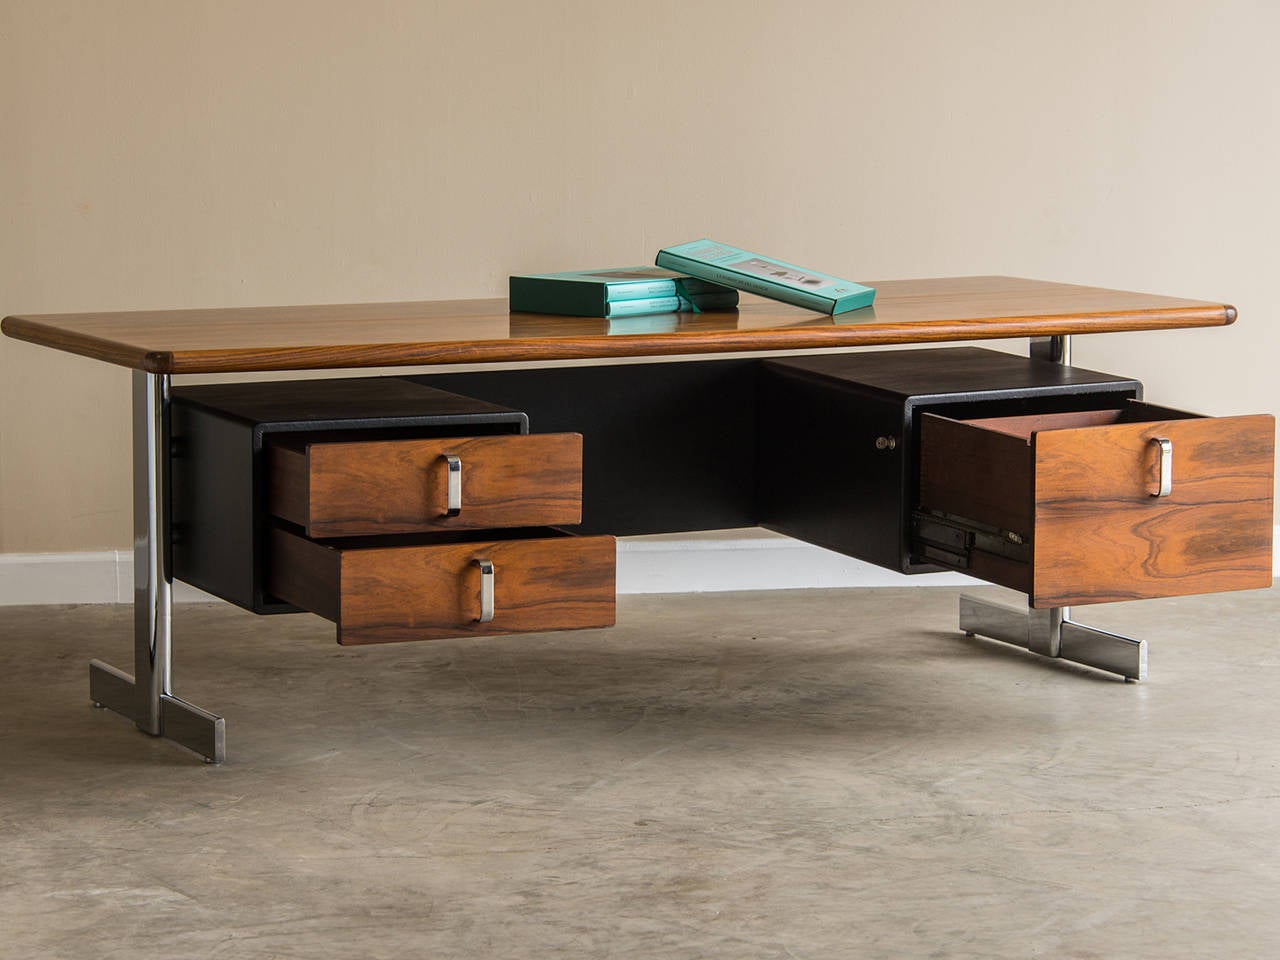 Late 20th Century Vintage American Warren Platner Leather and Walnut Desk for Knoll, circa 1973